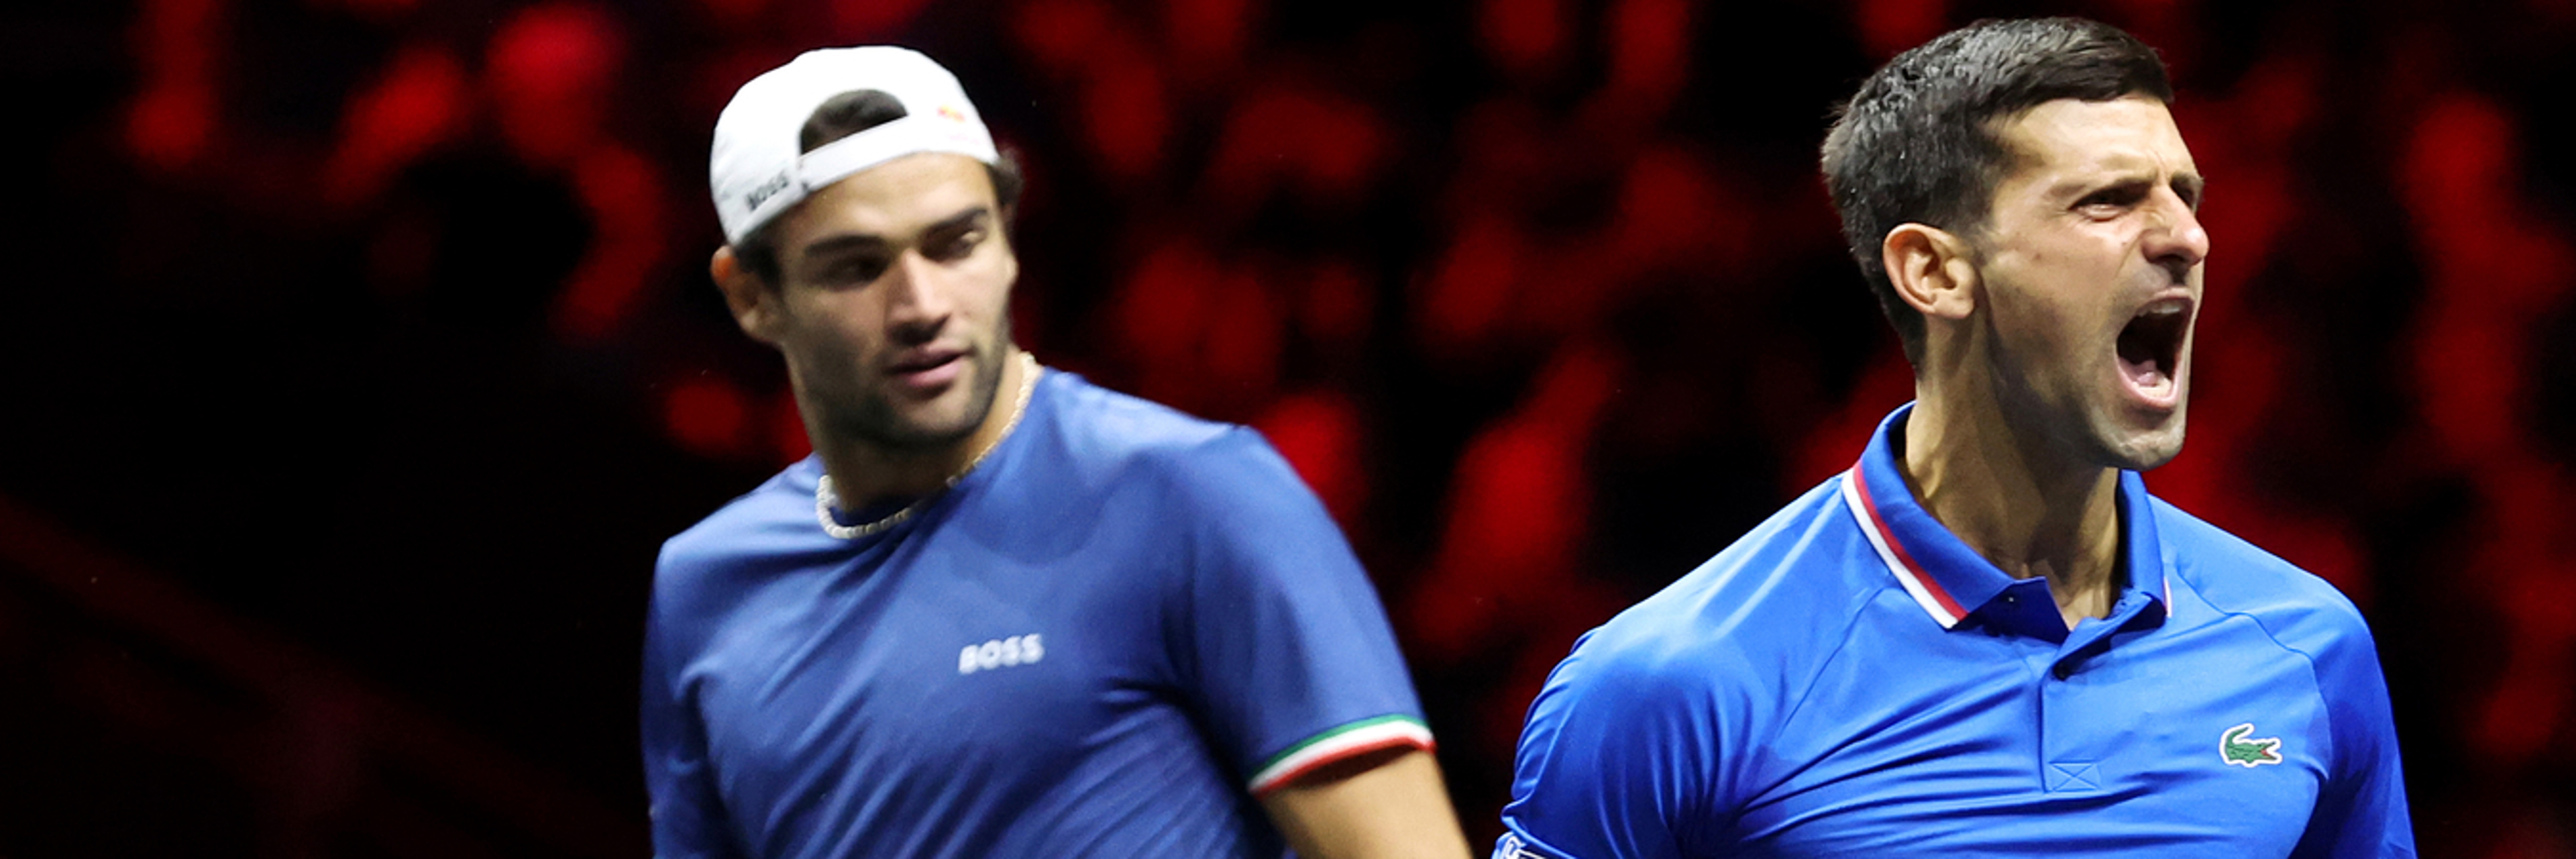 DOUBLE DUTY: Djokovic makes stylish return at Laver Cup as Federer watches on